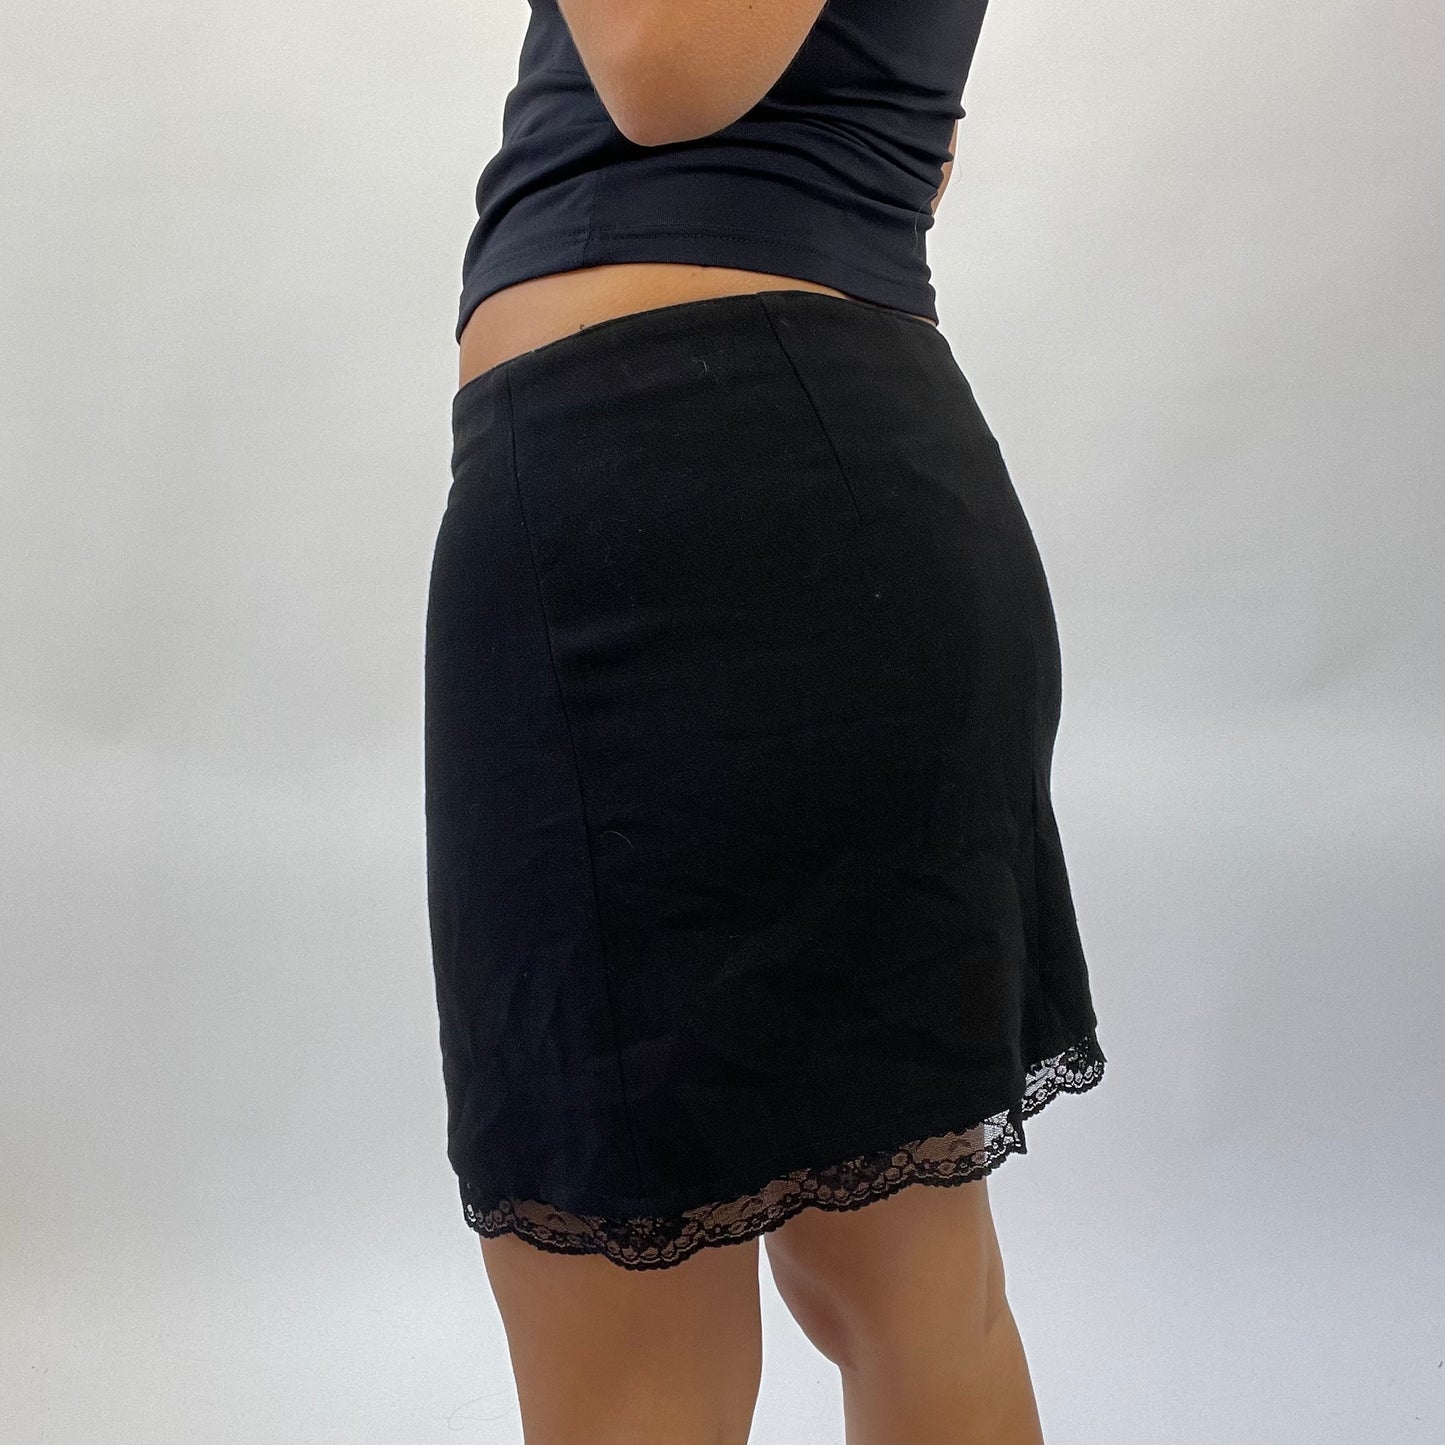 POSH AND BECKS DROP | small black skirt with lace trim